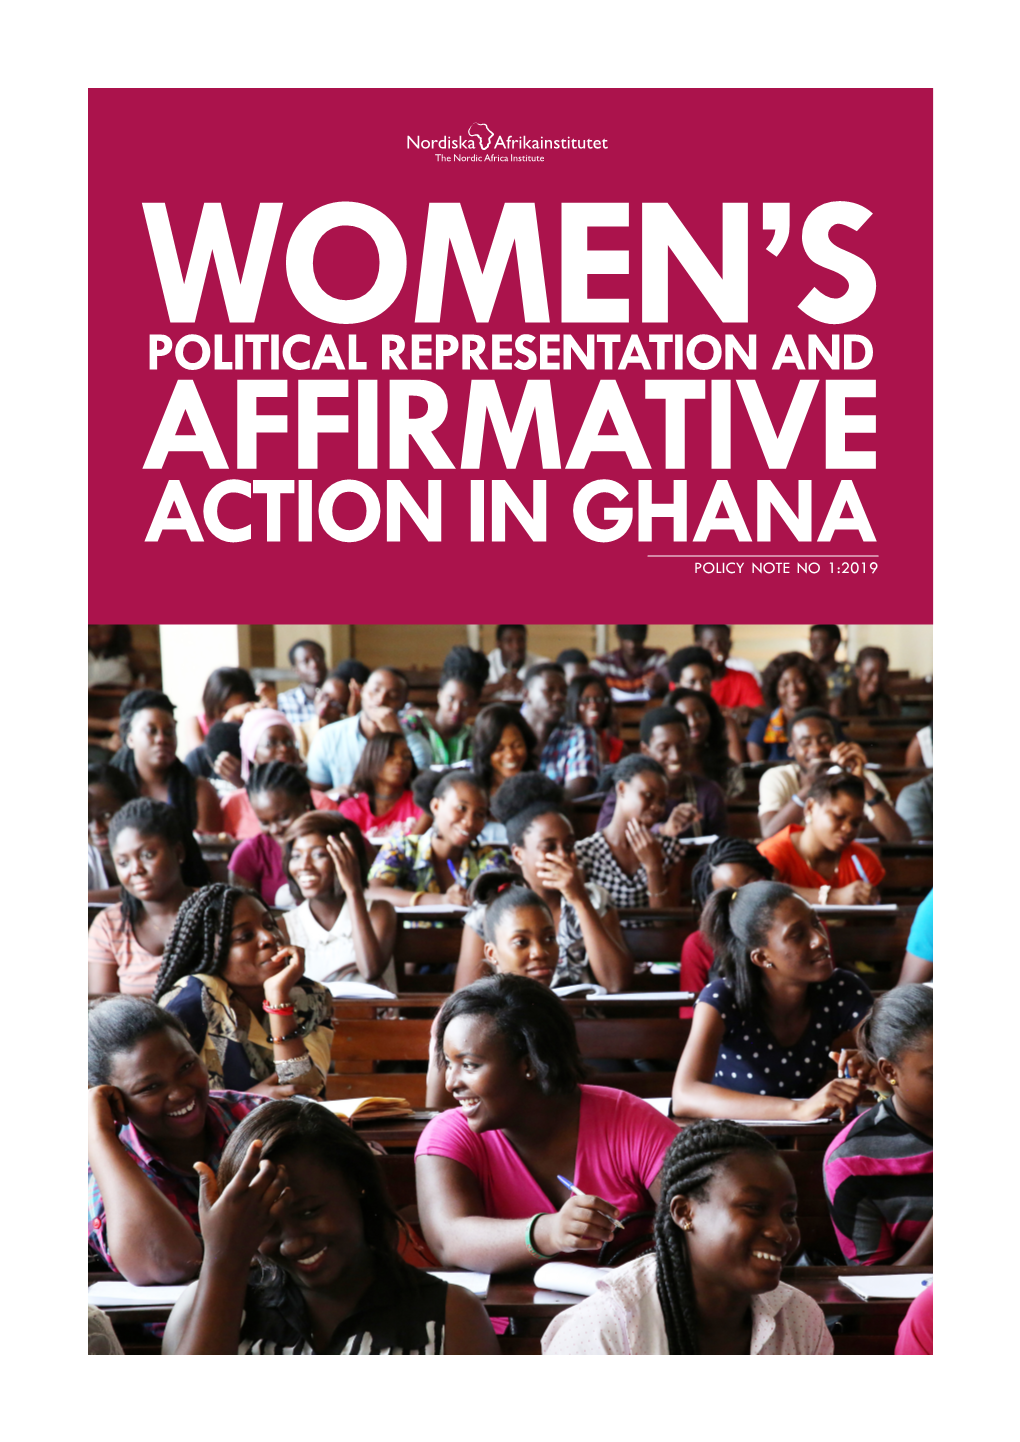 Women's Political Representation and Affirmative Action in Ghana